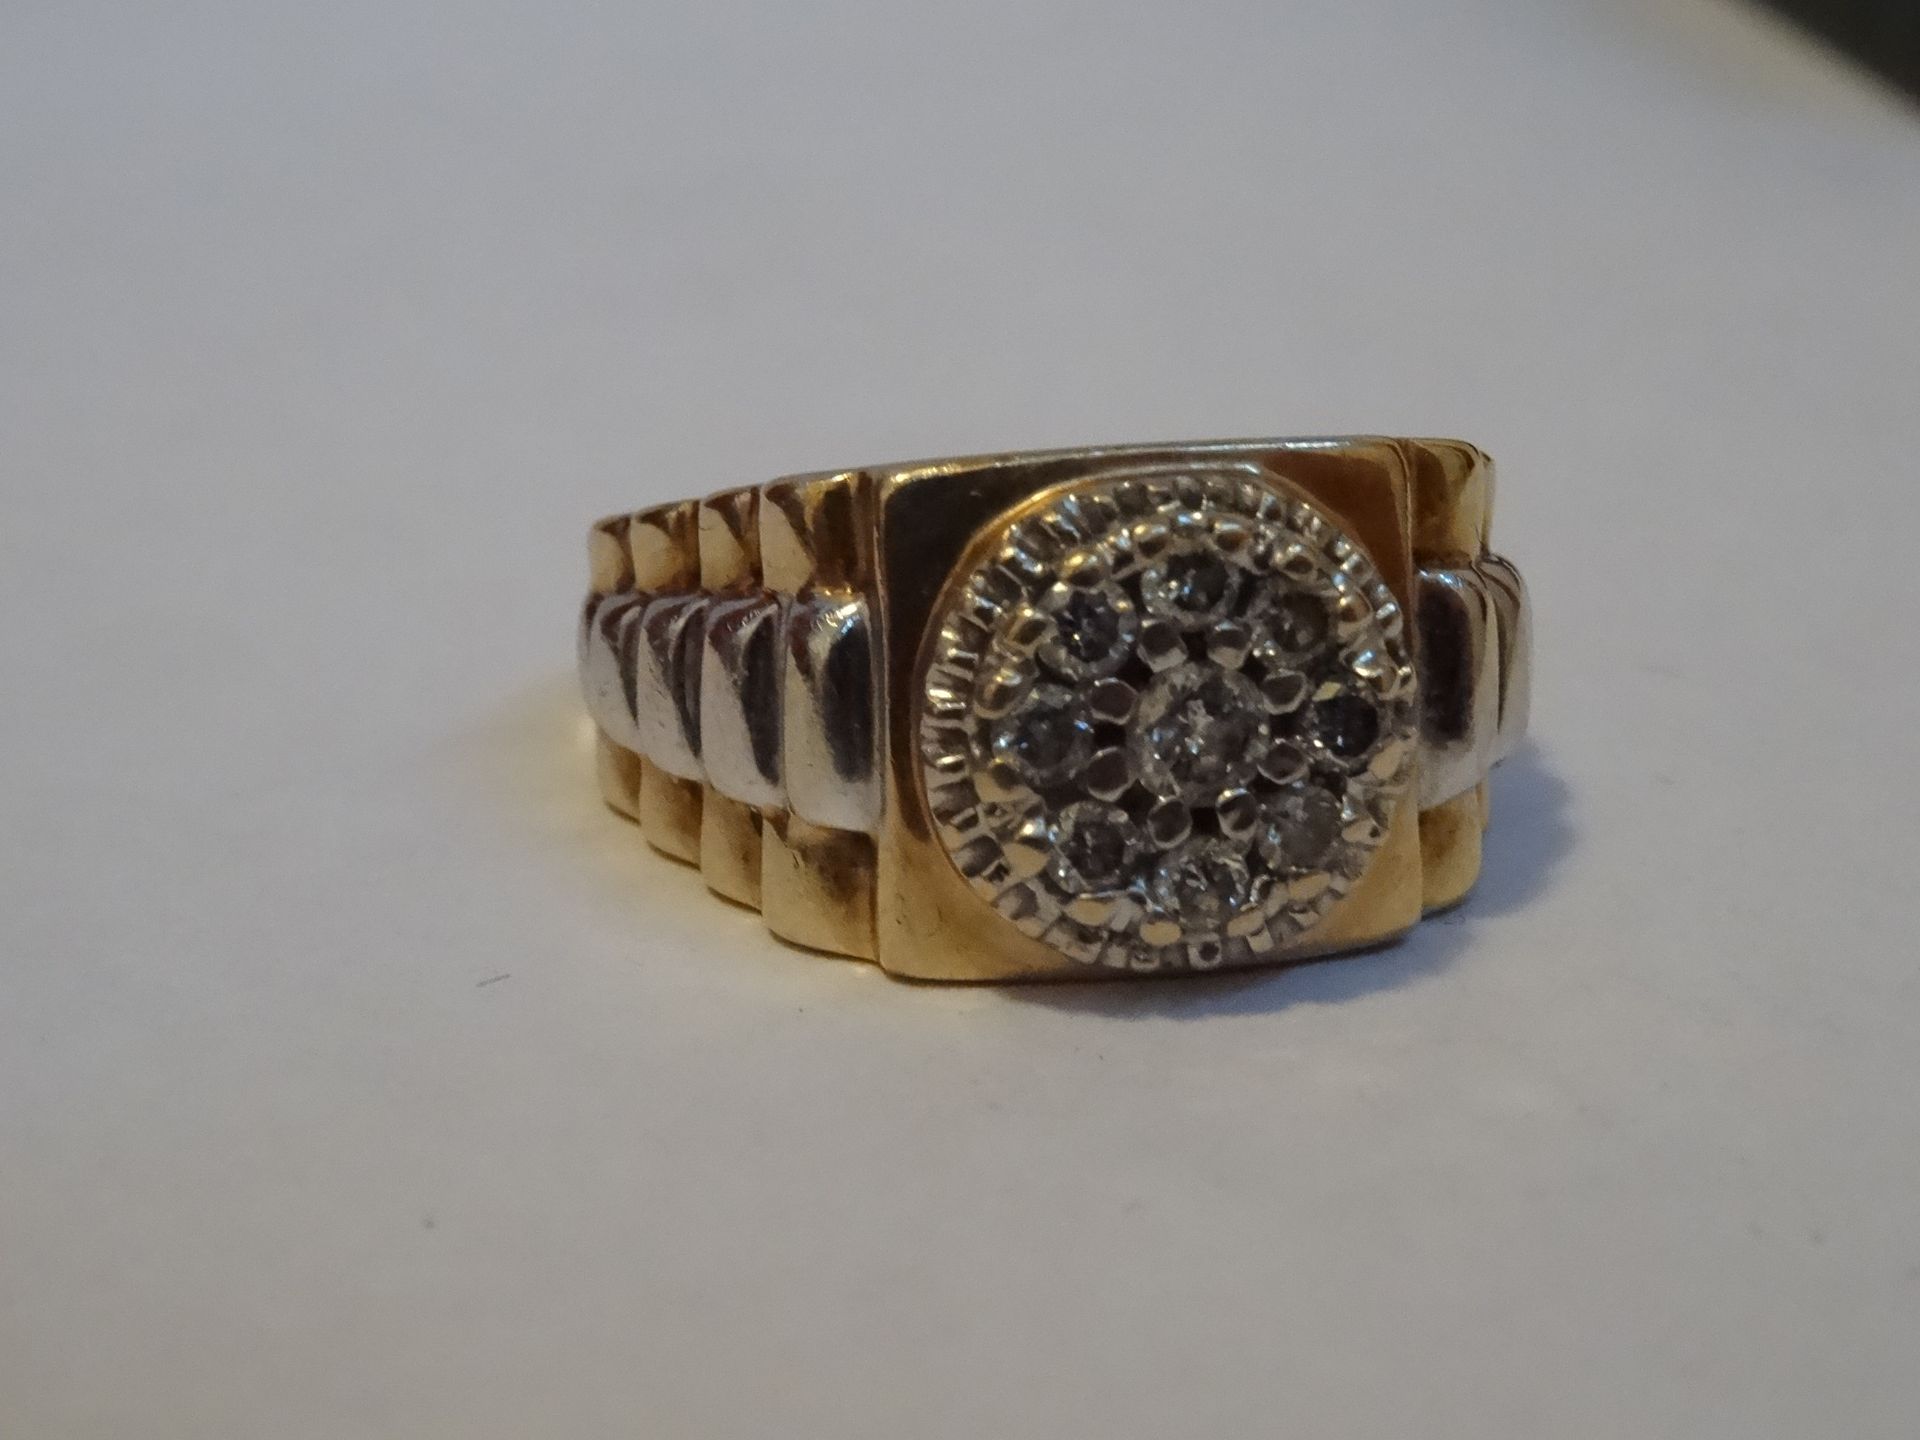 9 Carat Yellow & White Gold Gents Rolex Style Diamond Ring. - Image 3 of 4